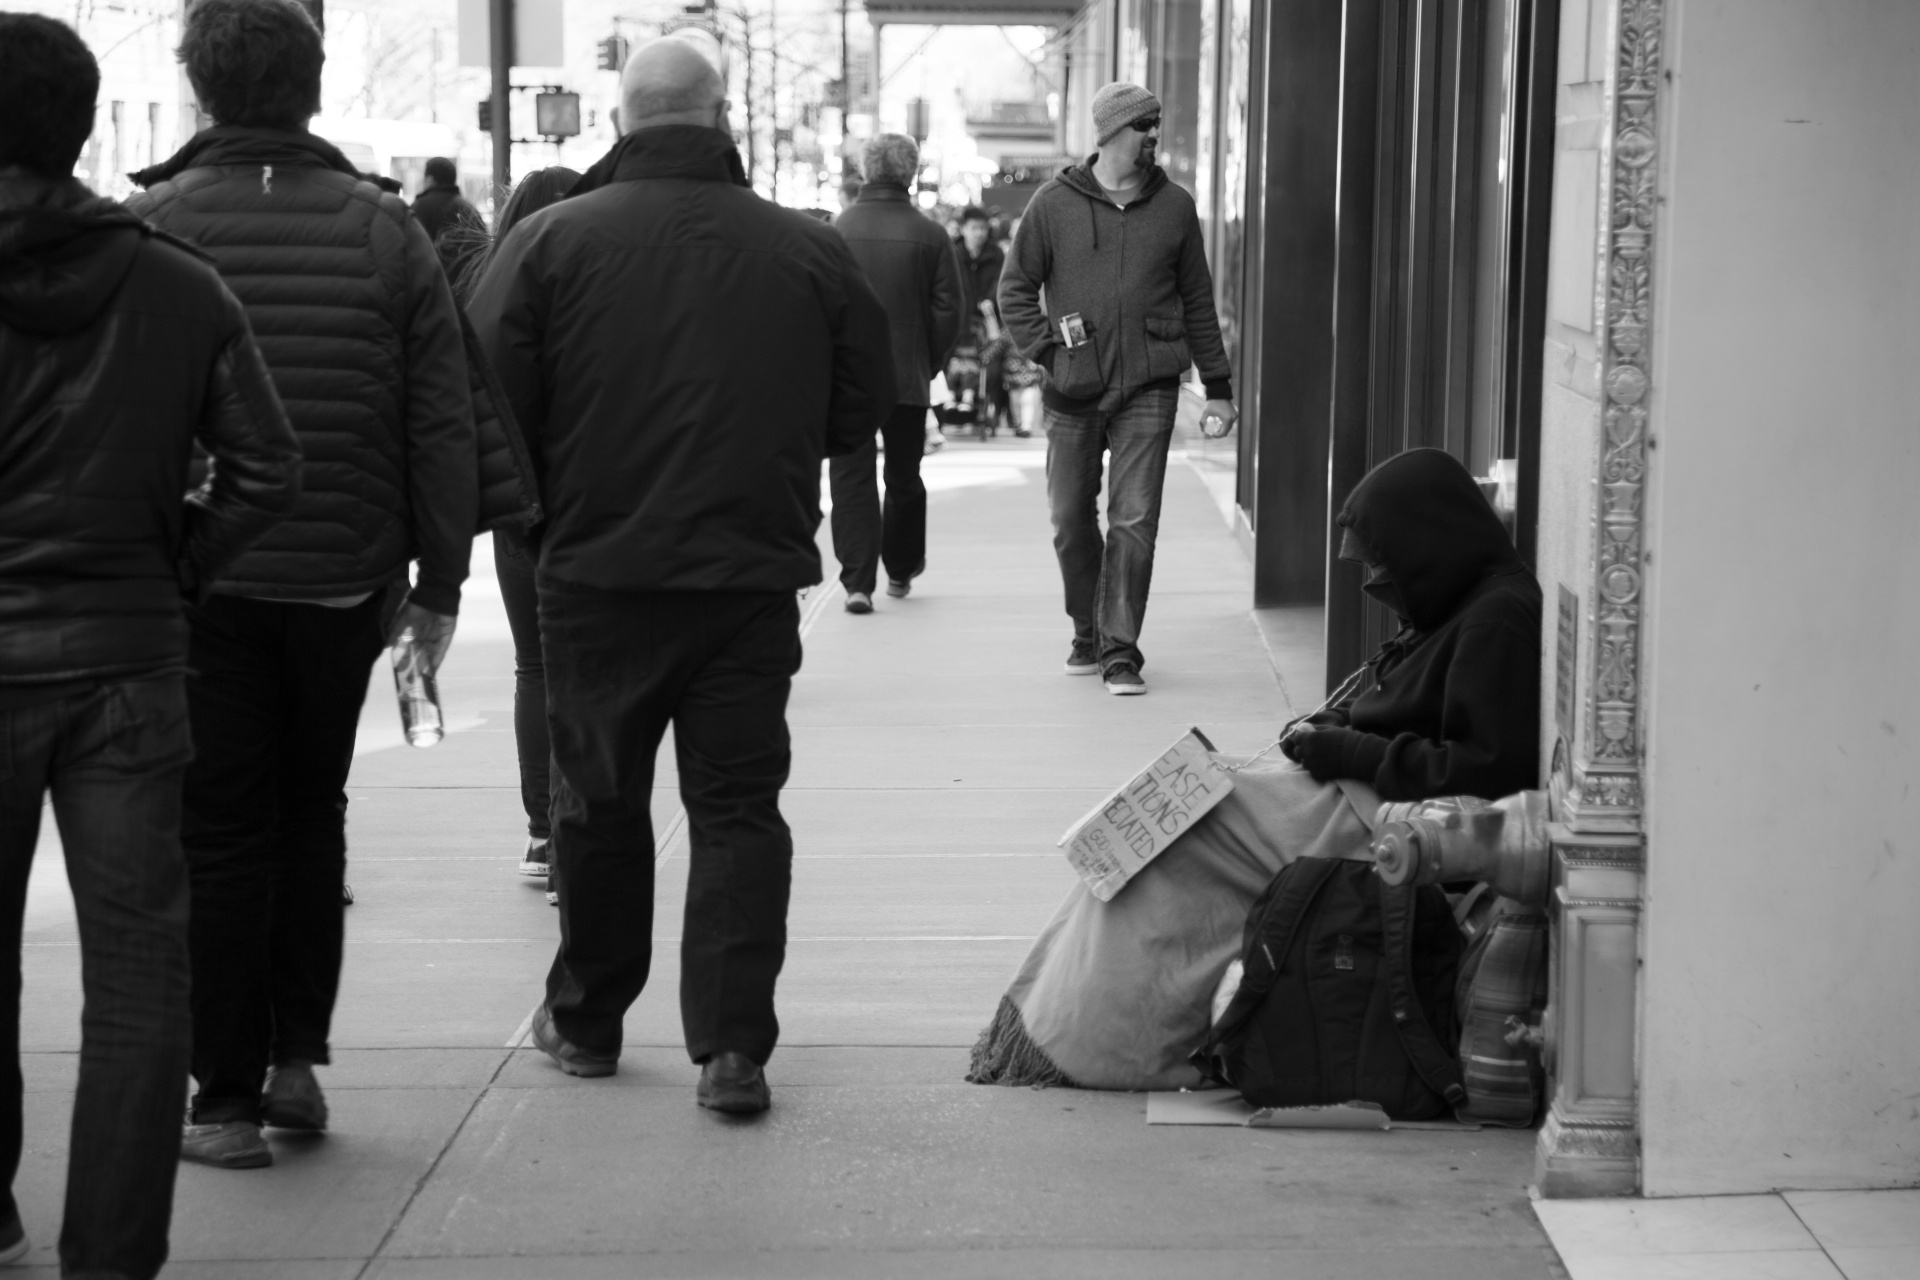 Homeless sitting on a street with sign with people walking by him.